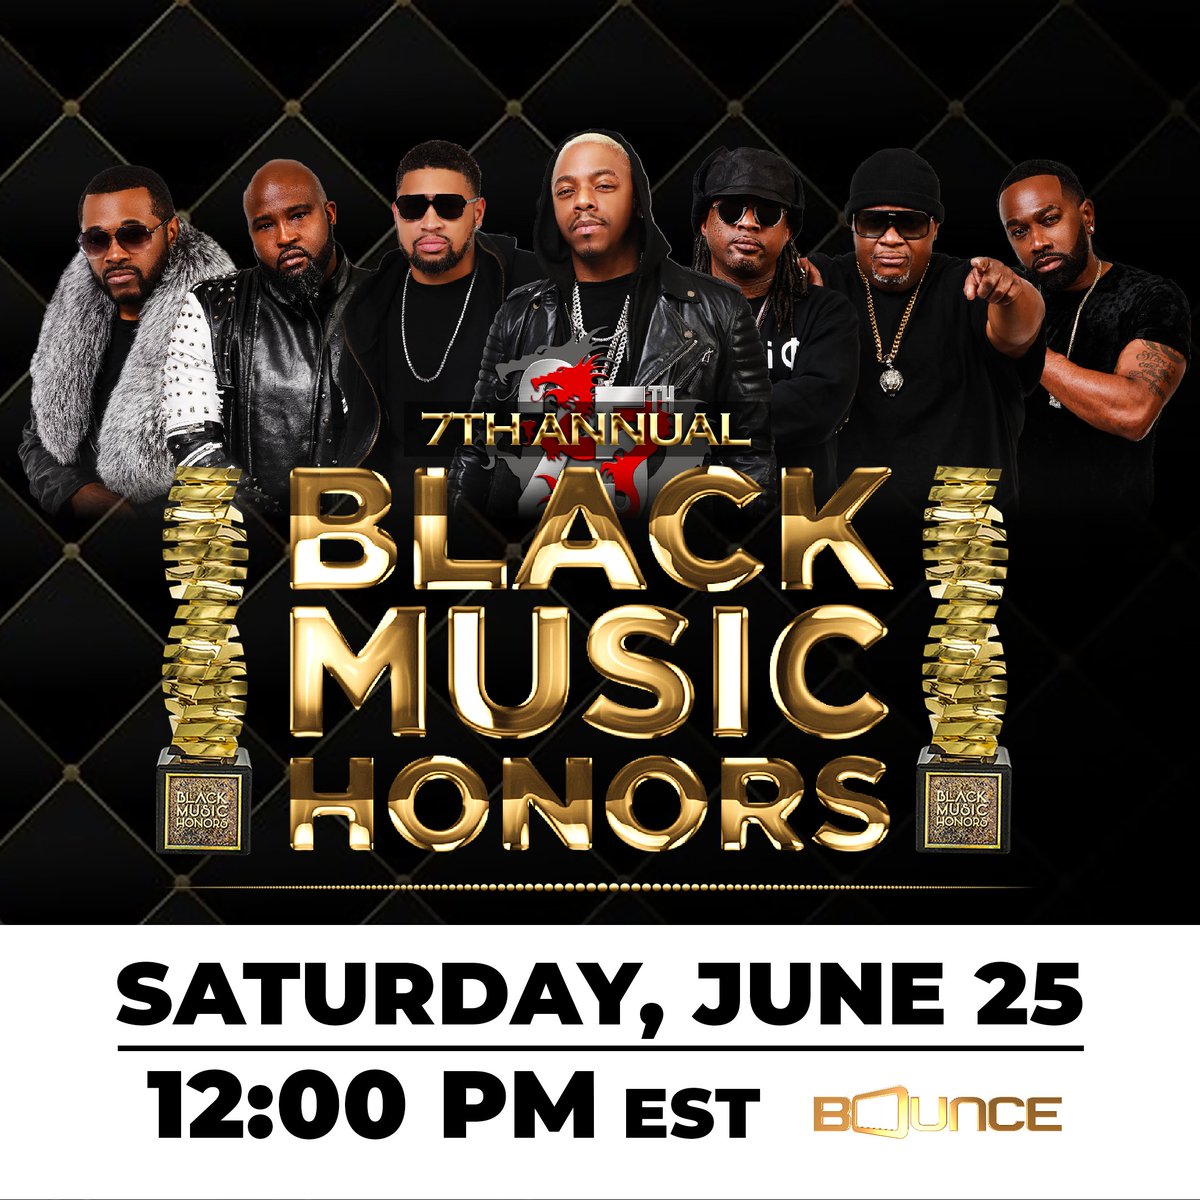 Don't miss the @BlackMusicHonor, hosted by @DeRayDavis & @LeToyaLuckett with a special honor and reunion performance by @DruHill4Real! Additional honorees @karyns_world, @thewhispers, @KeriHilson, @tevincampbelll! Airing Saturday, June 25th @ 12PM on @bouncetv #blackmusichonors